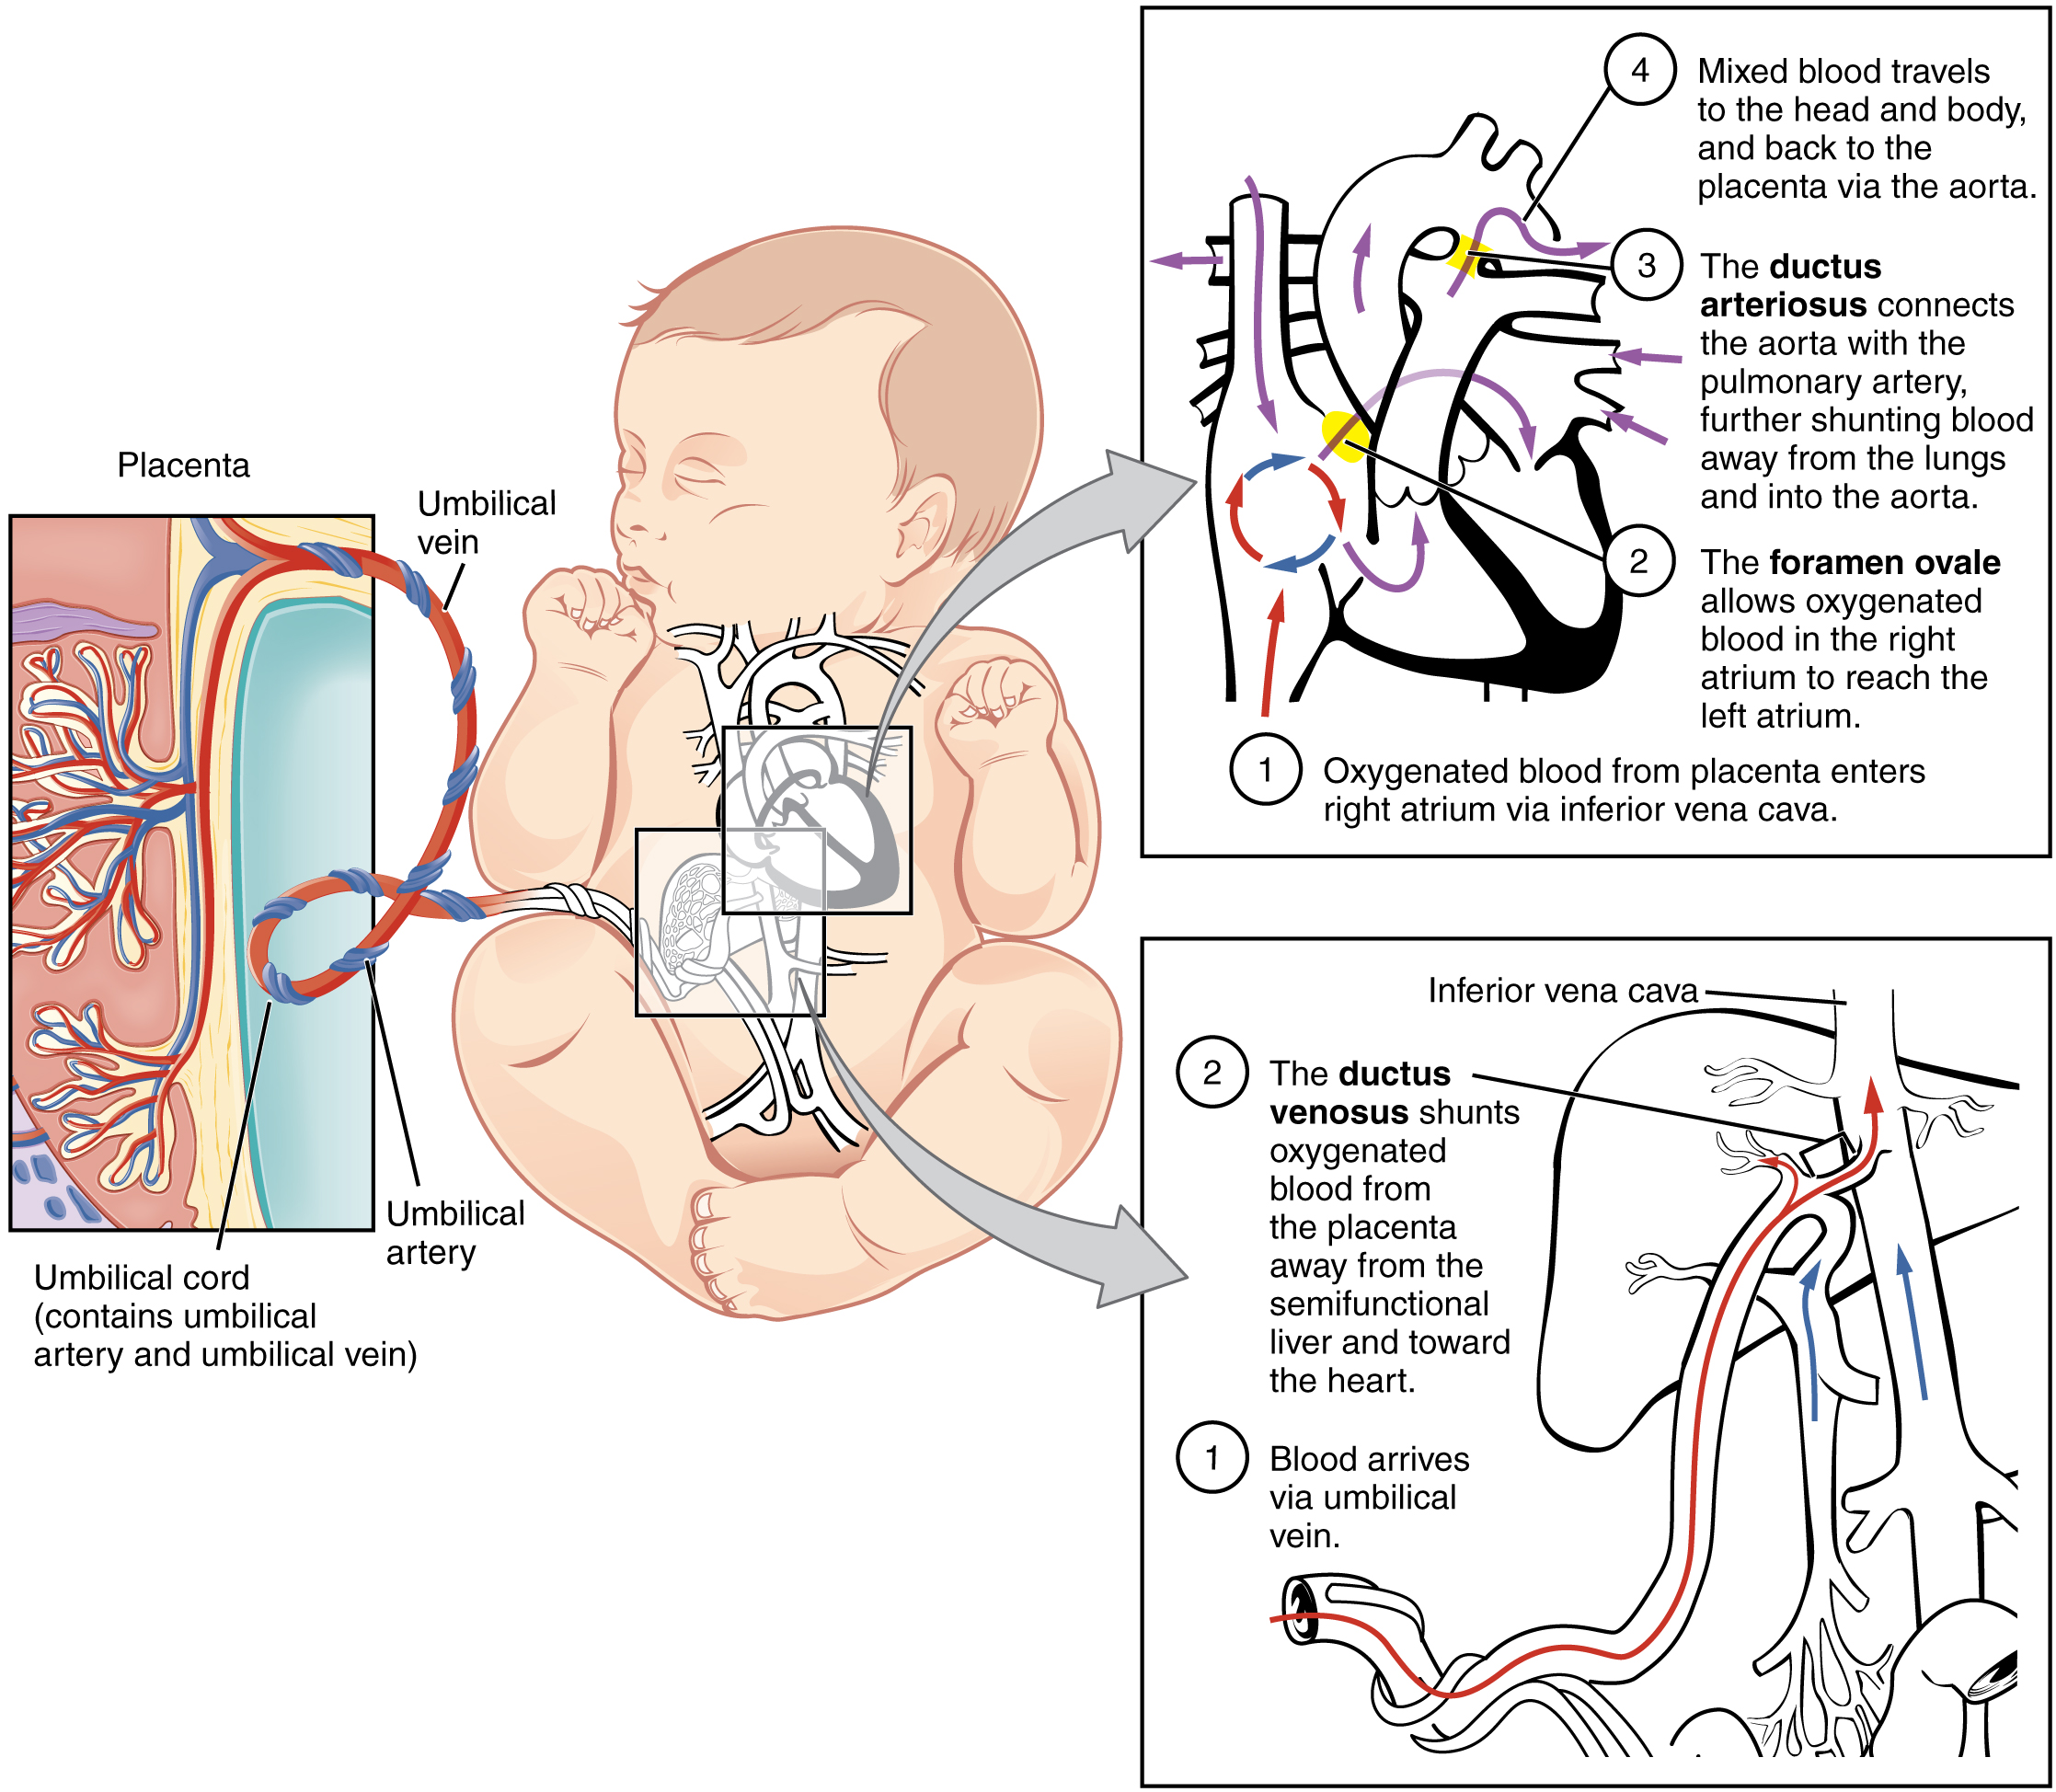 This figure shows a baby in the center of the image. To the left, is a panel showing the umbilical cord and how blood is supplied to the baby in the womb. Two panels on the right show the circulation of blood inside the baby’s body.